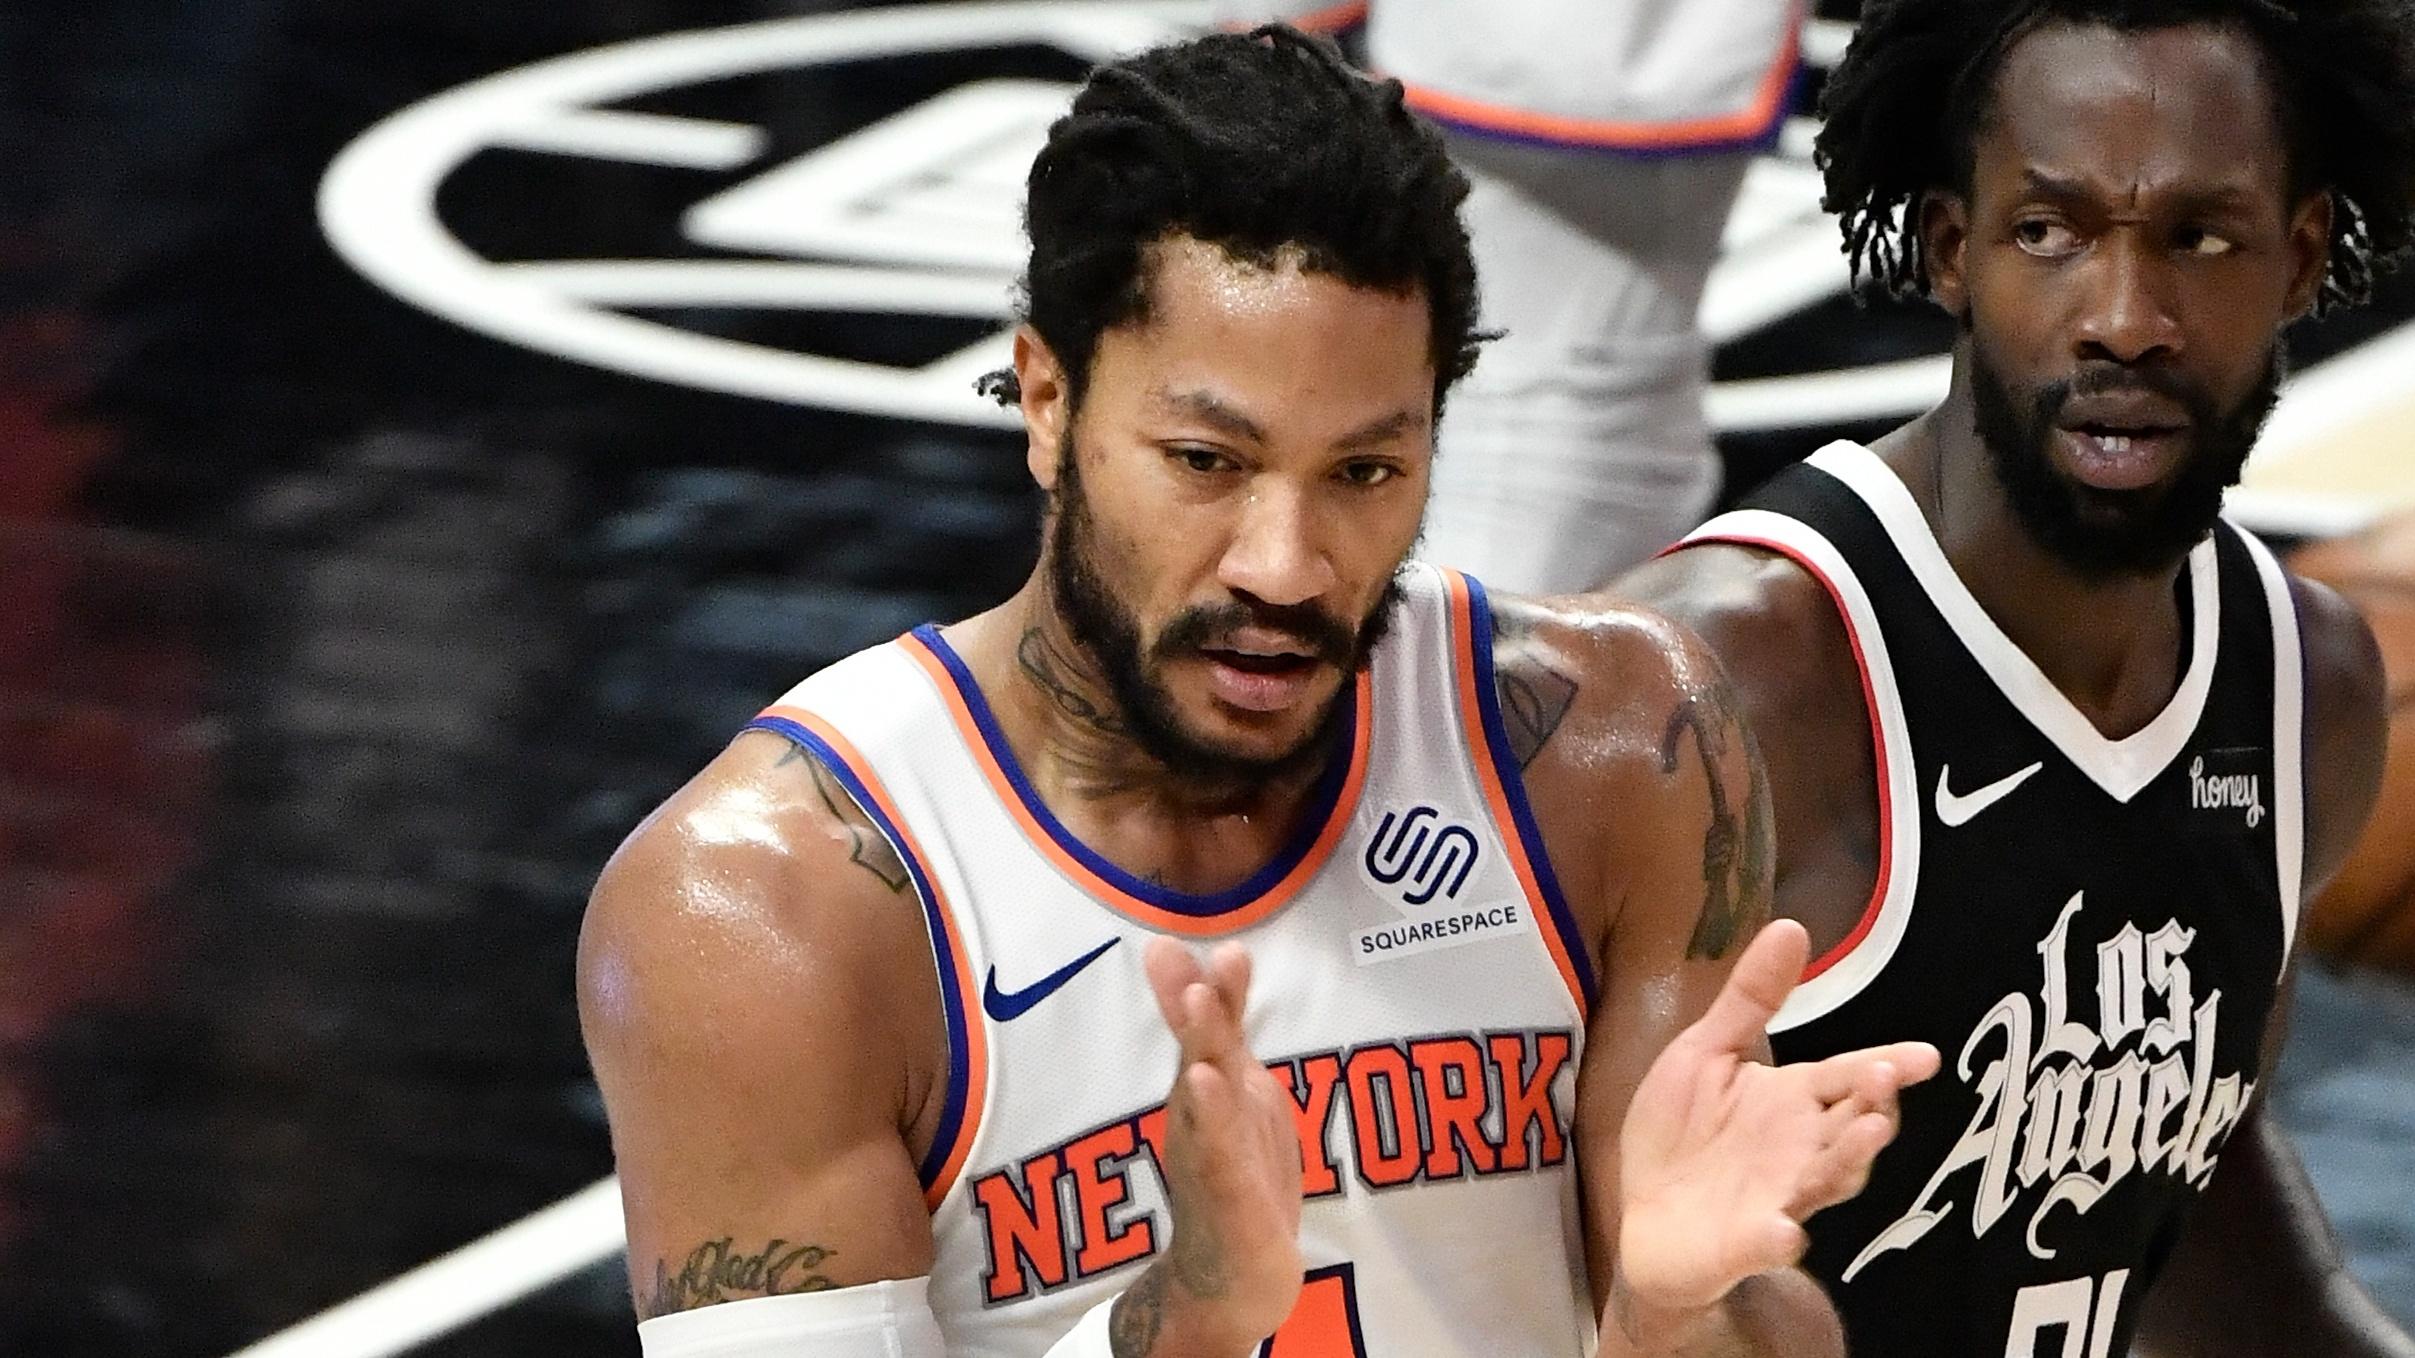 May 9, 2021; Los Angeles, California, USA; New York Knicks guard Derrick Rose (4) reacts to a referee's call going his way during the section quarter as LA Clippers guard Patrick Beverley (21) looks on at Staples Center. Mandatory Credit: Robert Hanashiro-USA TODAY Sports / © Robert Hanashiro-USA TODAY Sports